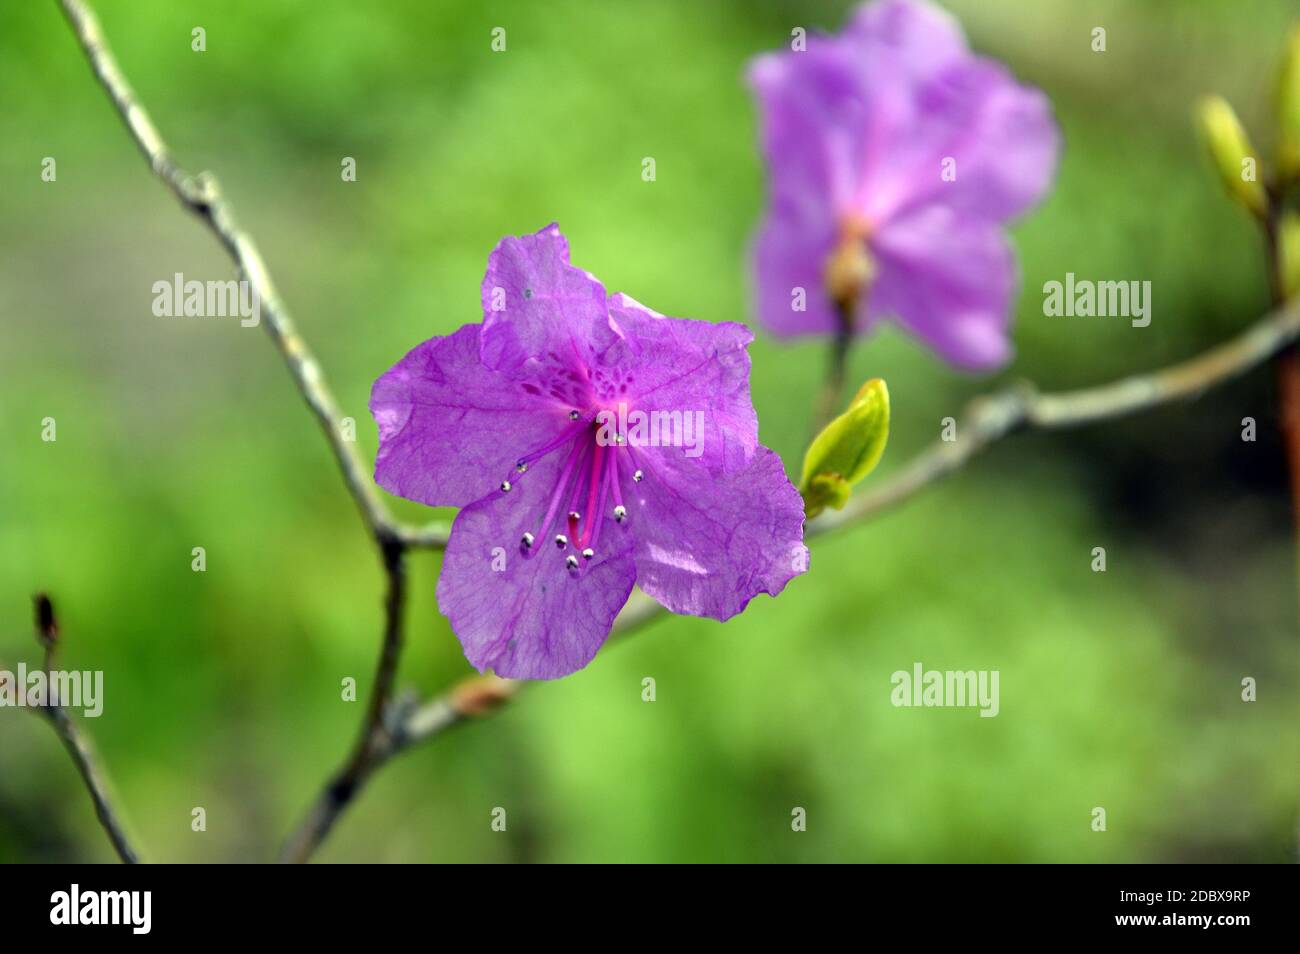 Rhododendron sichotense in Primorsky krai, Far East Russia. Type of Rhododendron growing in Russia. Stock Photo